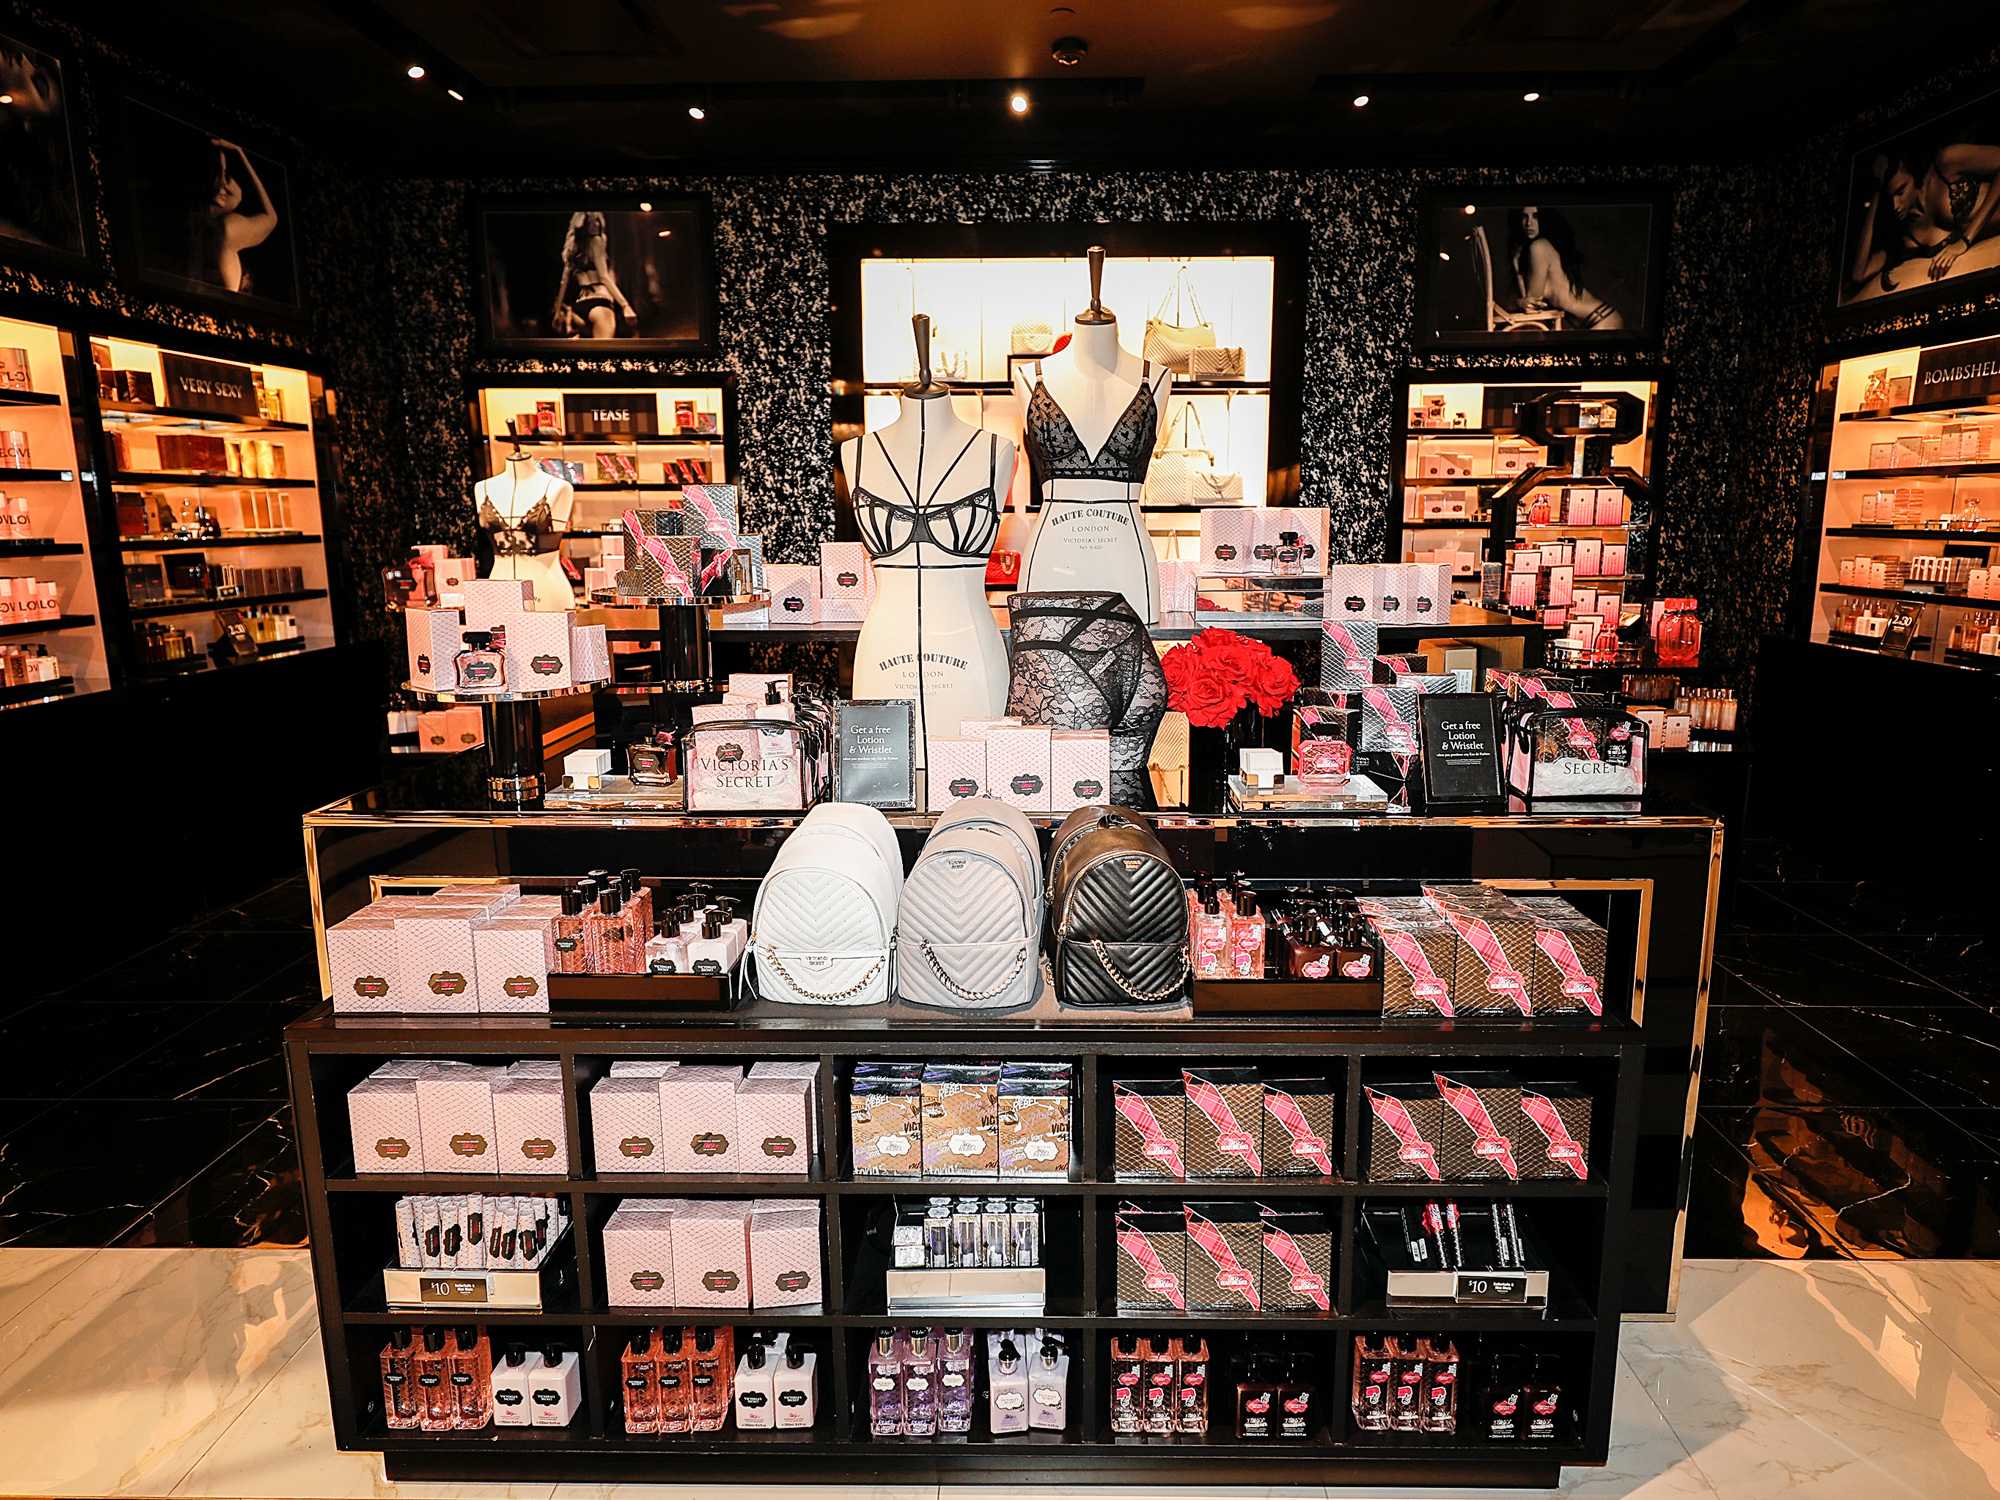 Victoria's Secret Launches VS&Co-Lab, Highlighting Other Brands